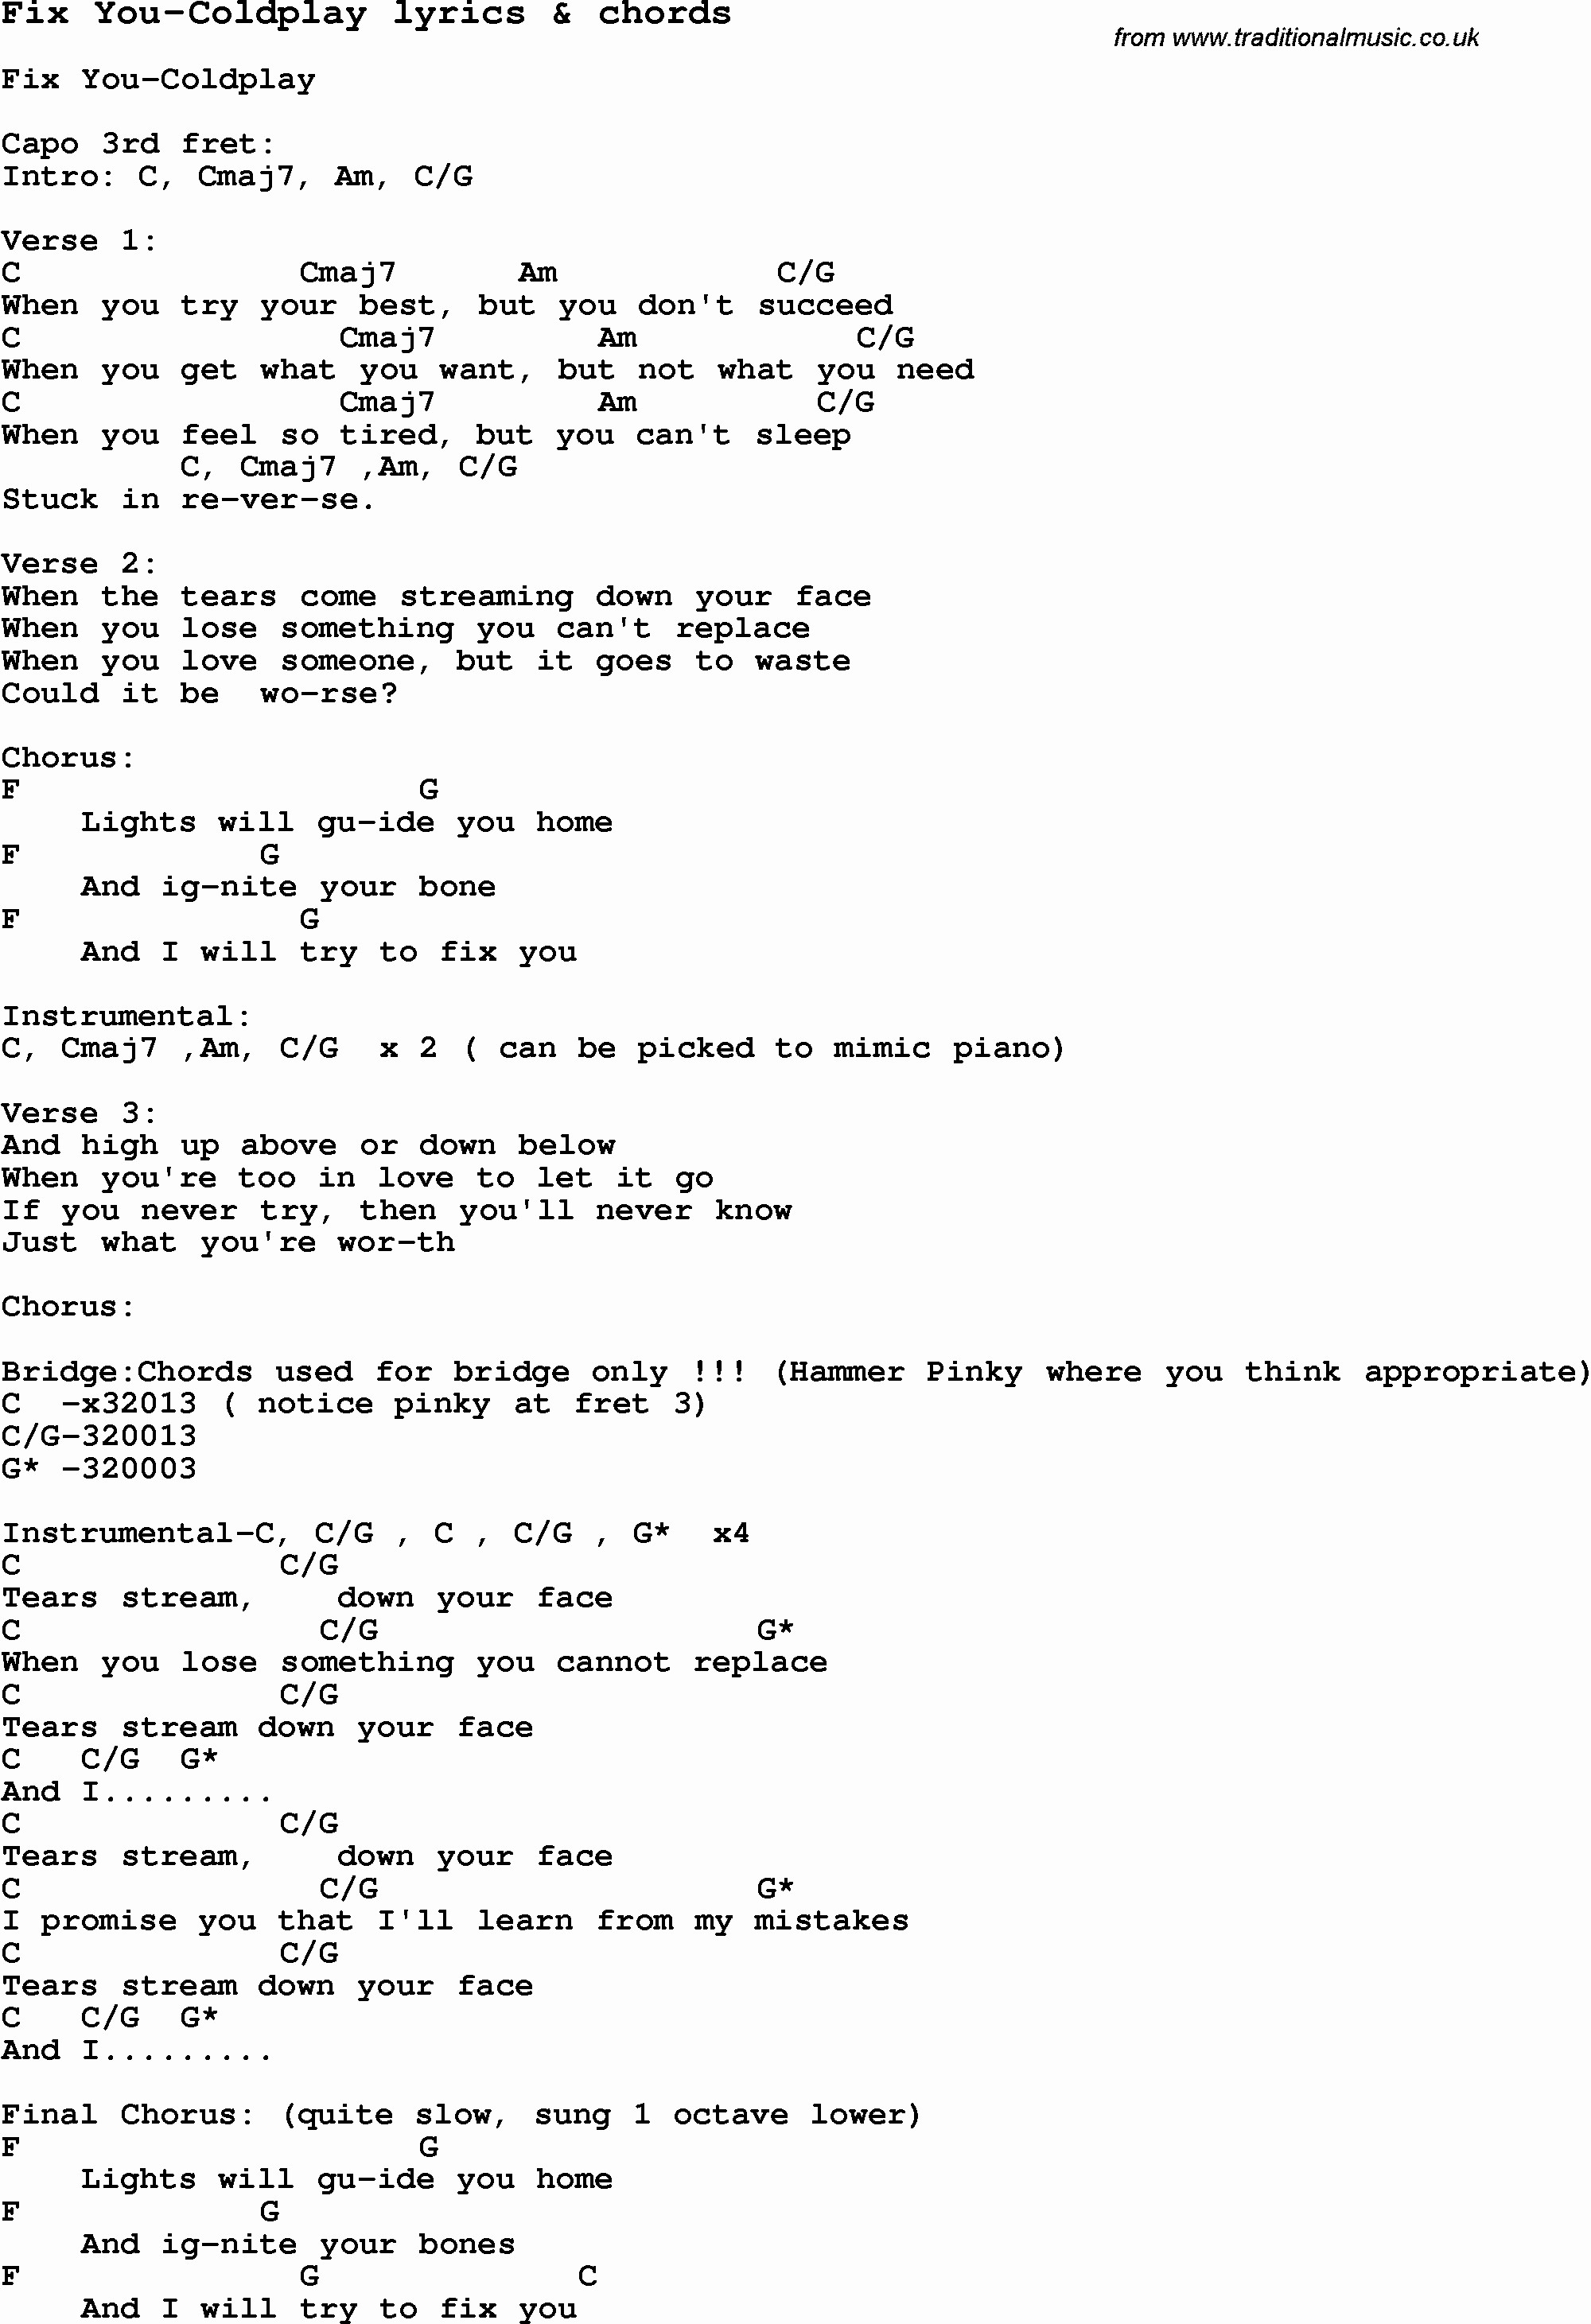 Fix You Chords Coldplay Guitar Chords Accomplice Music